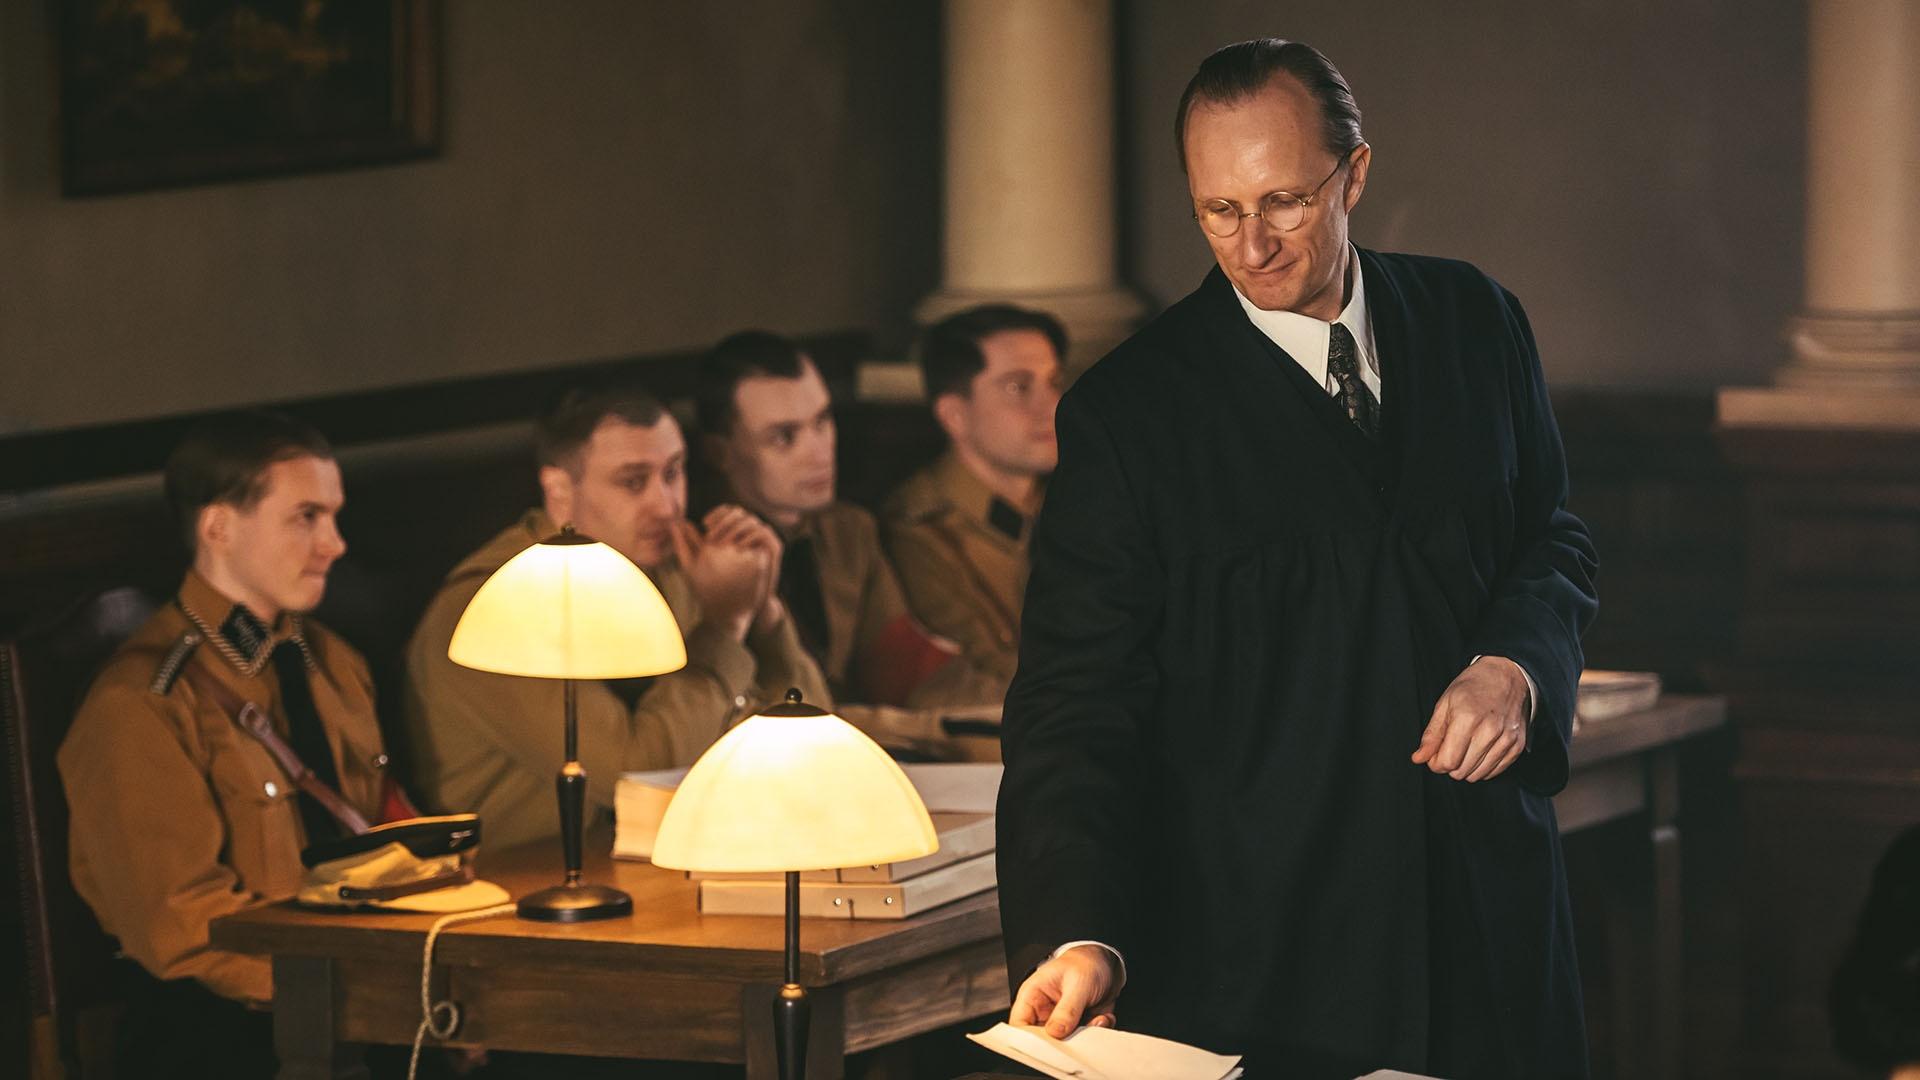 Drama reconstruction of Lawyer Hans Litten in court prosecuting four stormtroopers.